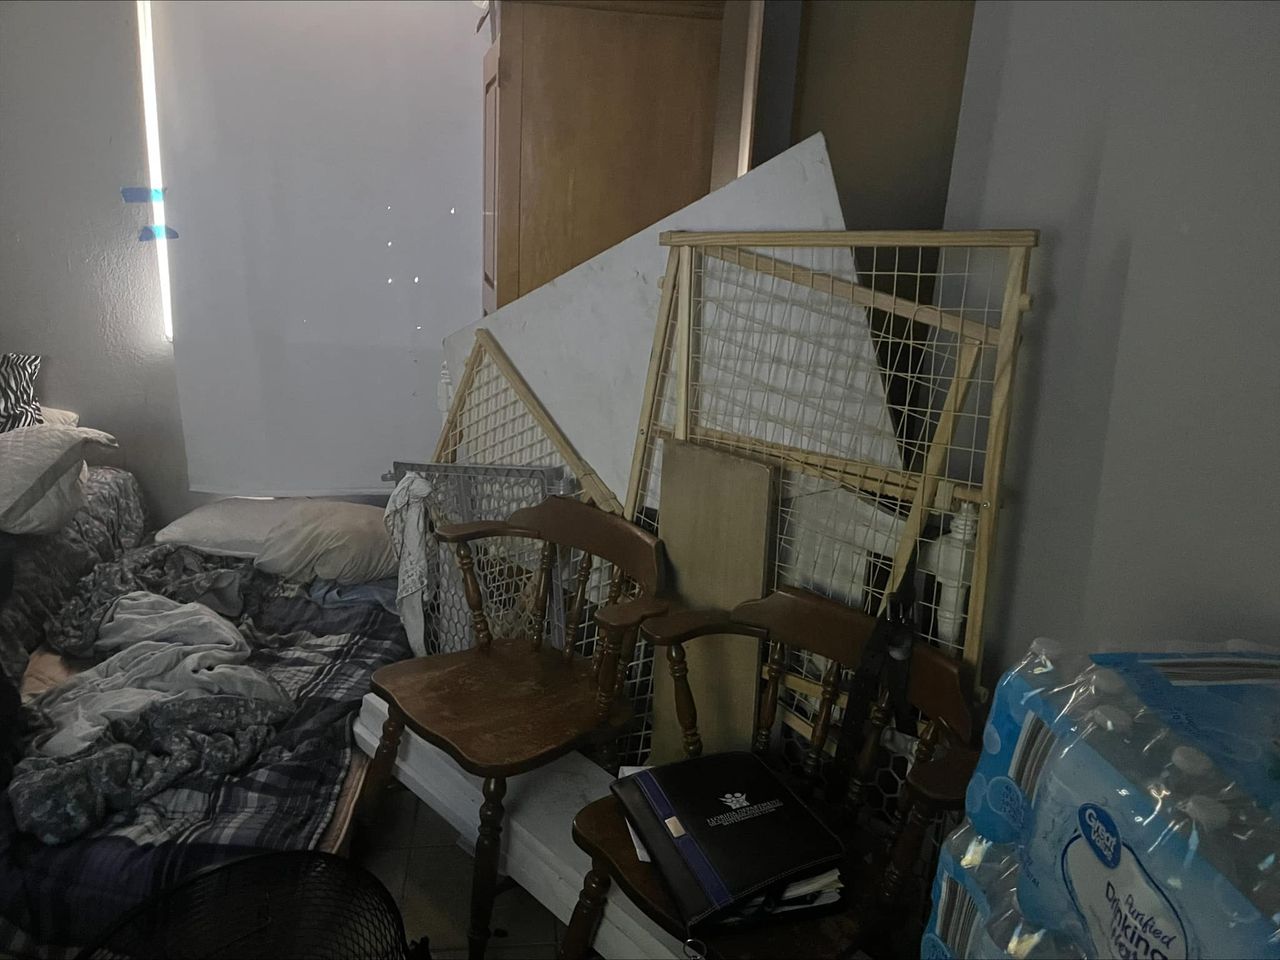 Police say James Spiess and Rebecca Worthington trapped their child inside a closet, pictured, by barricading the door with furniture. They are now facing child neglect charges